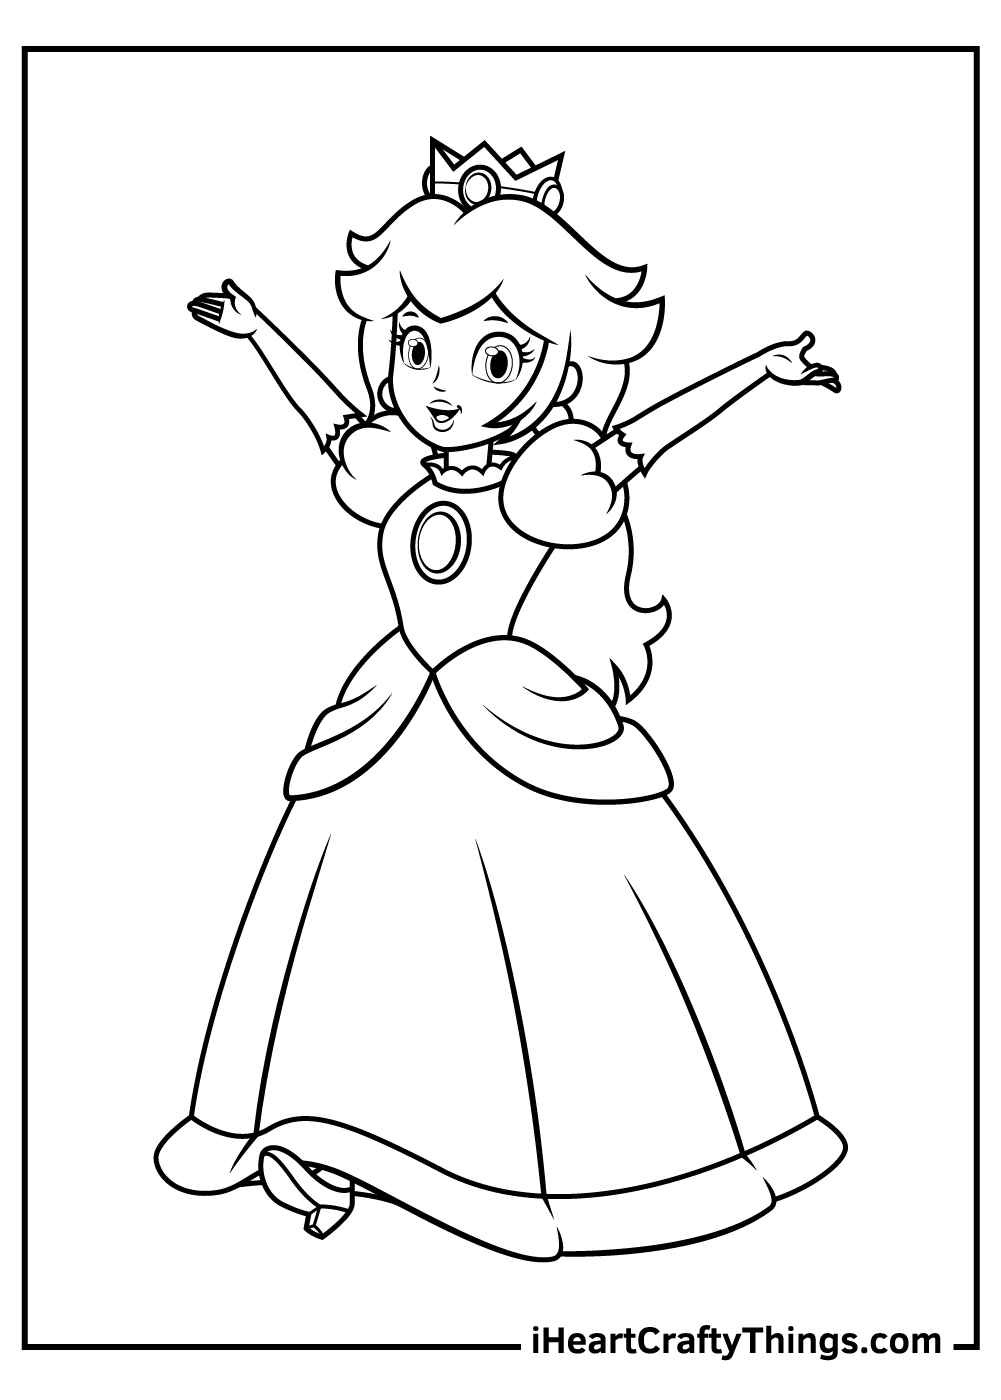 Princess peach coloring pages free printables